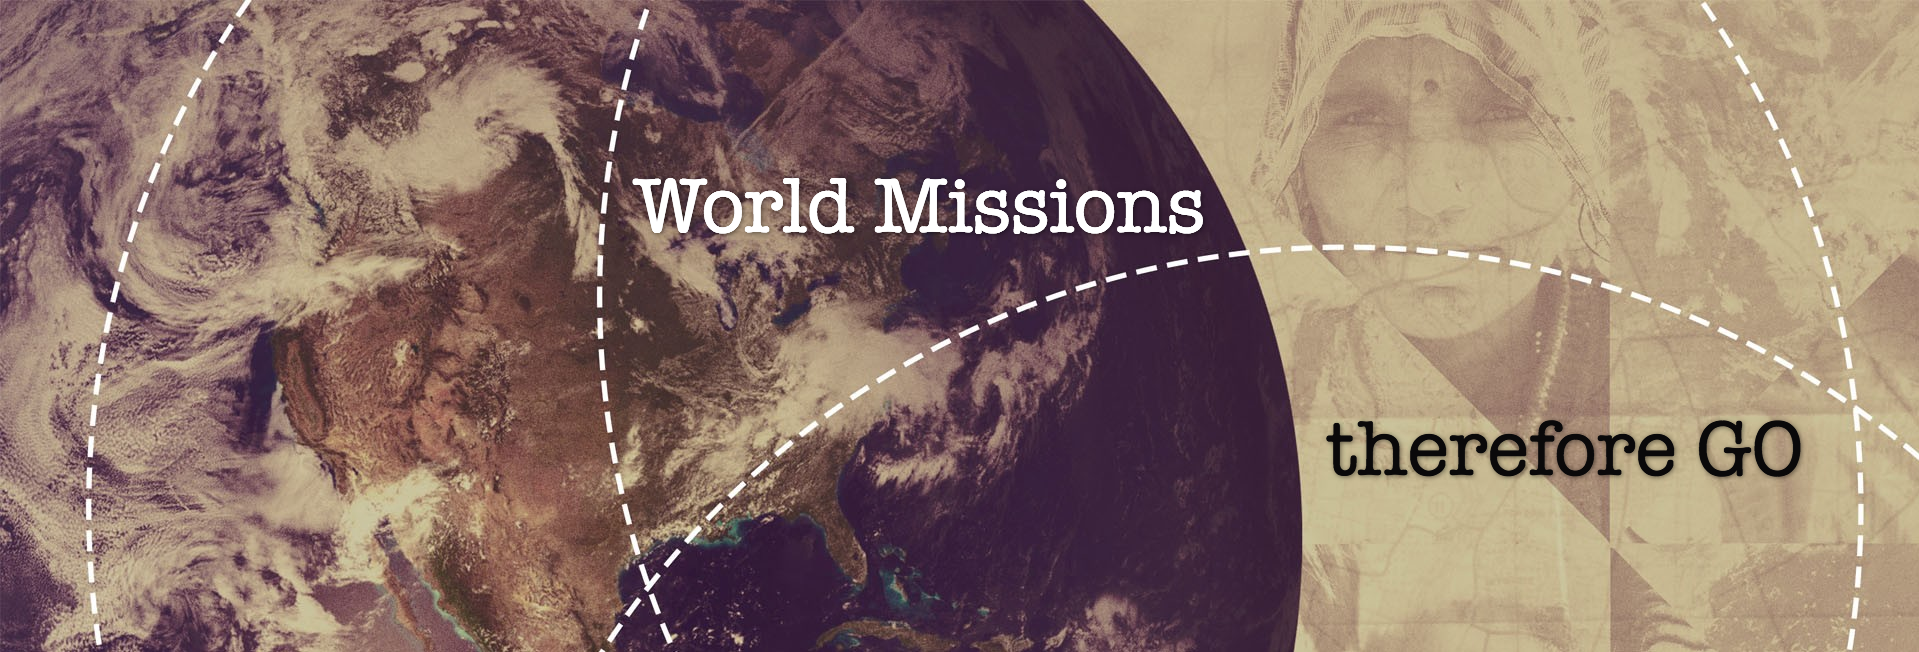 Preach the Gospel Missions Church Website Banner